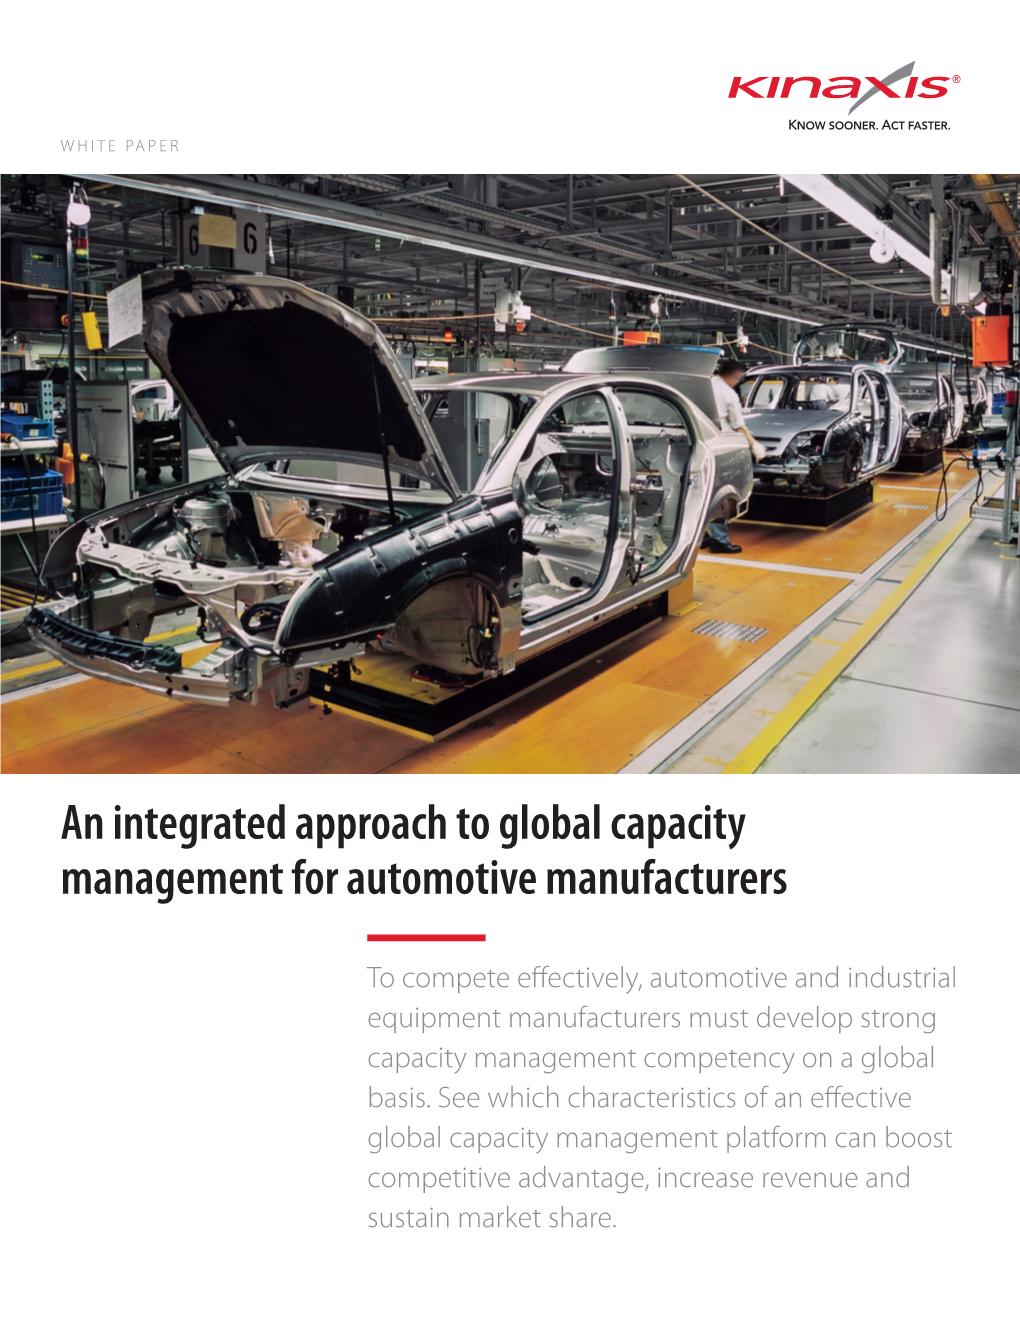 An Integrated Approach to Global Capacity Management for Automotive Manufacturers